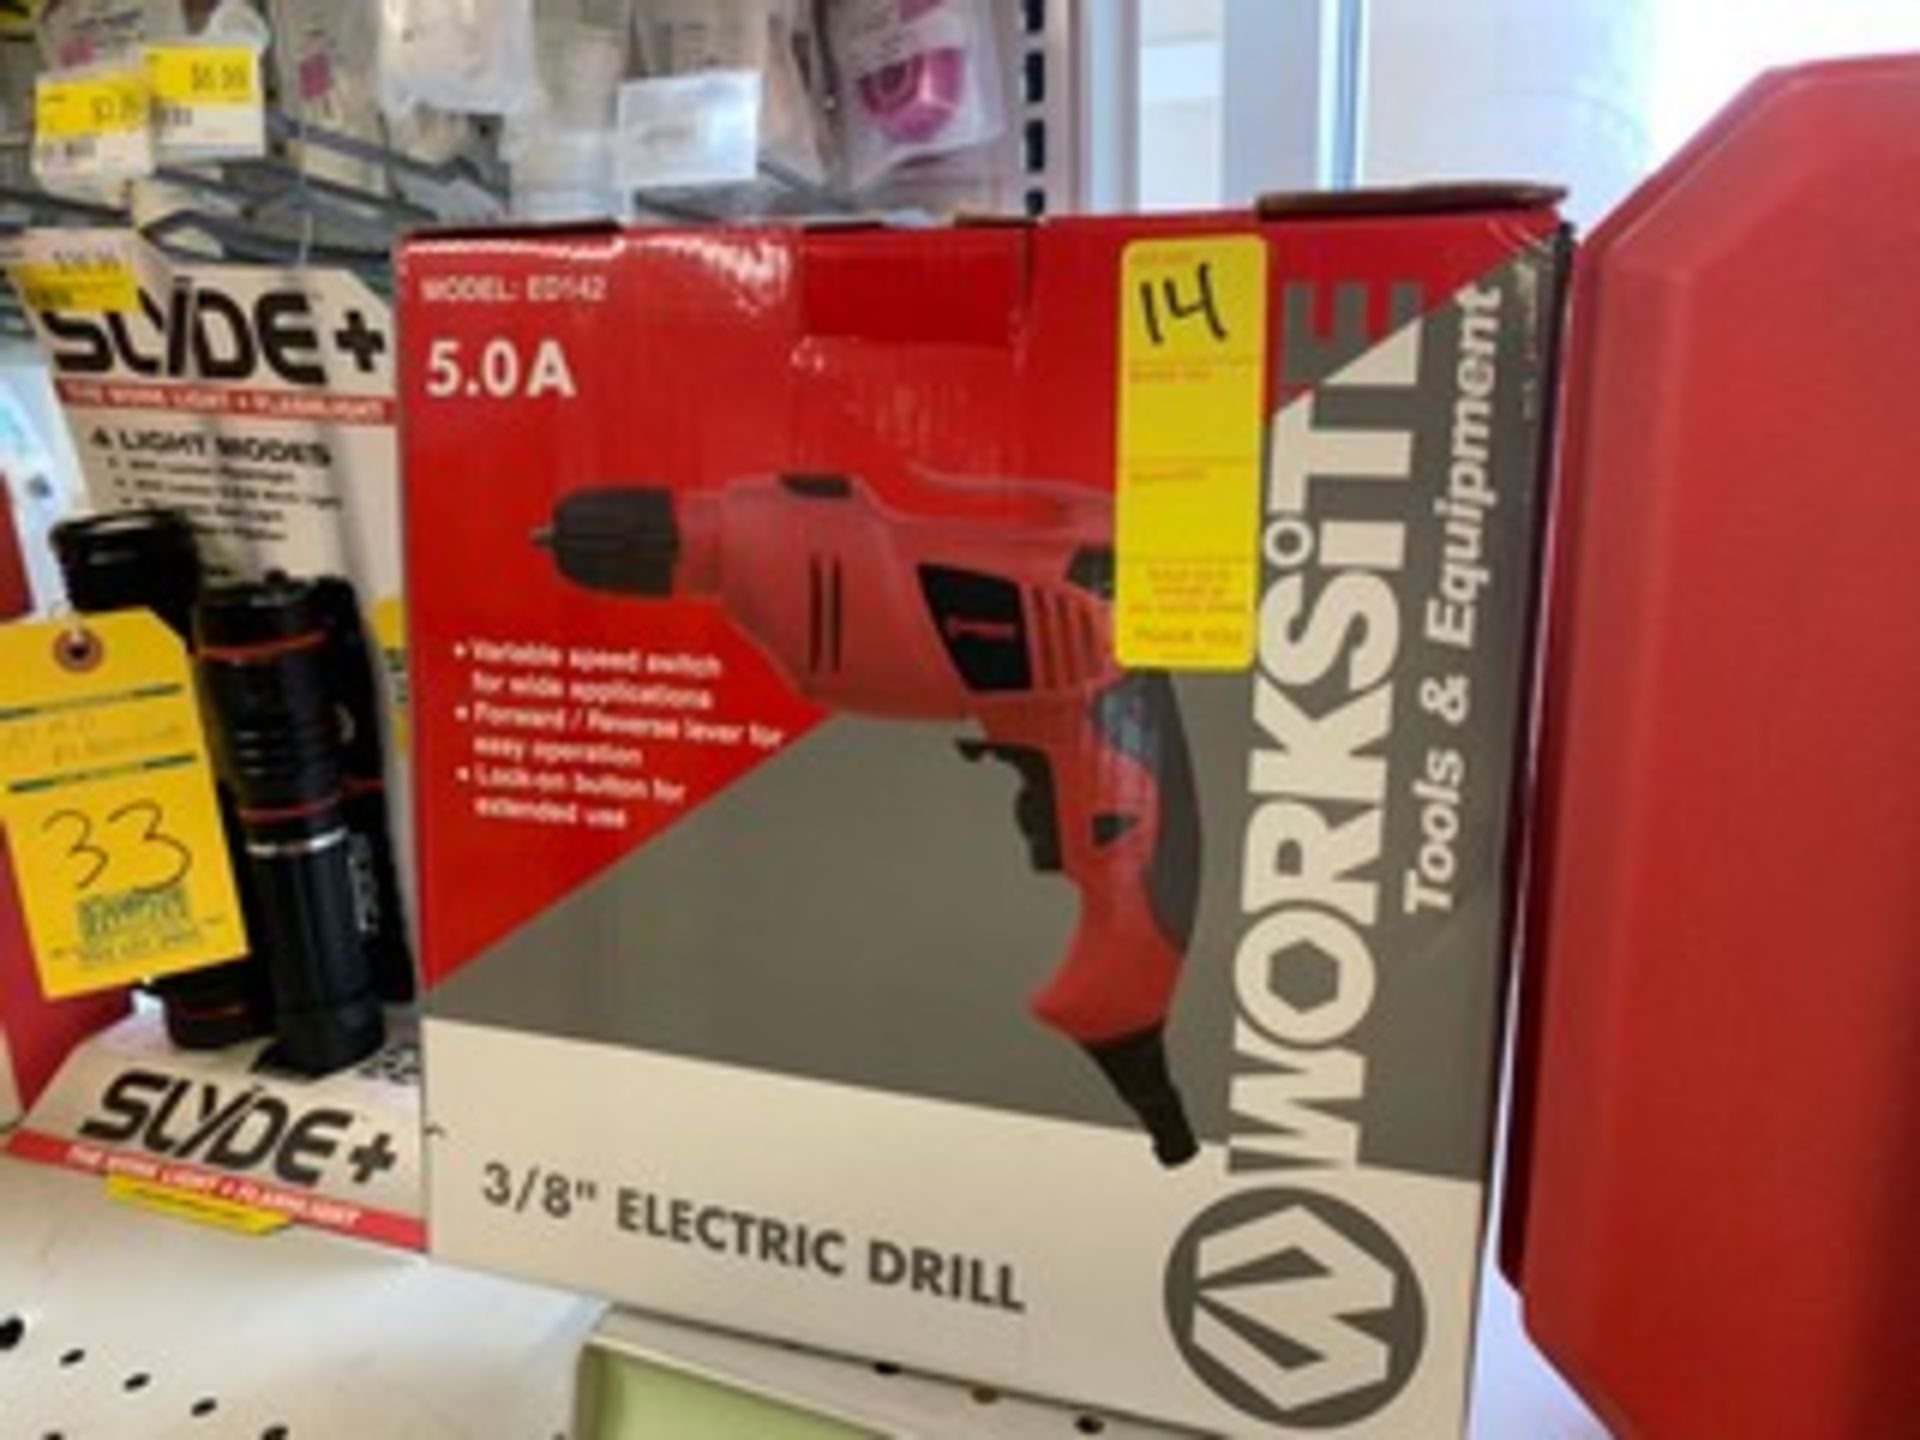 WORKSITE ED142 ELECTRIC DRILL - 3/8''